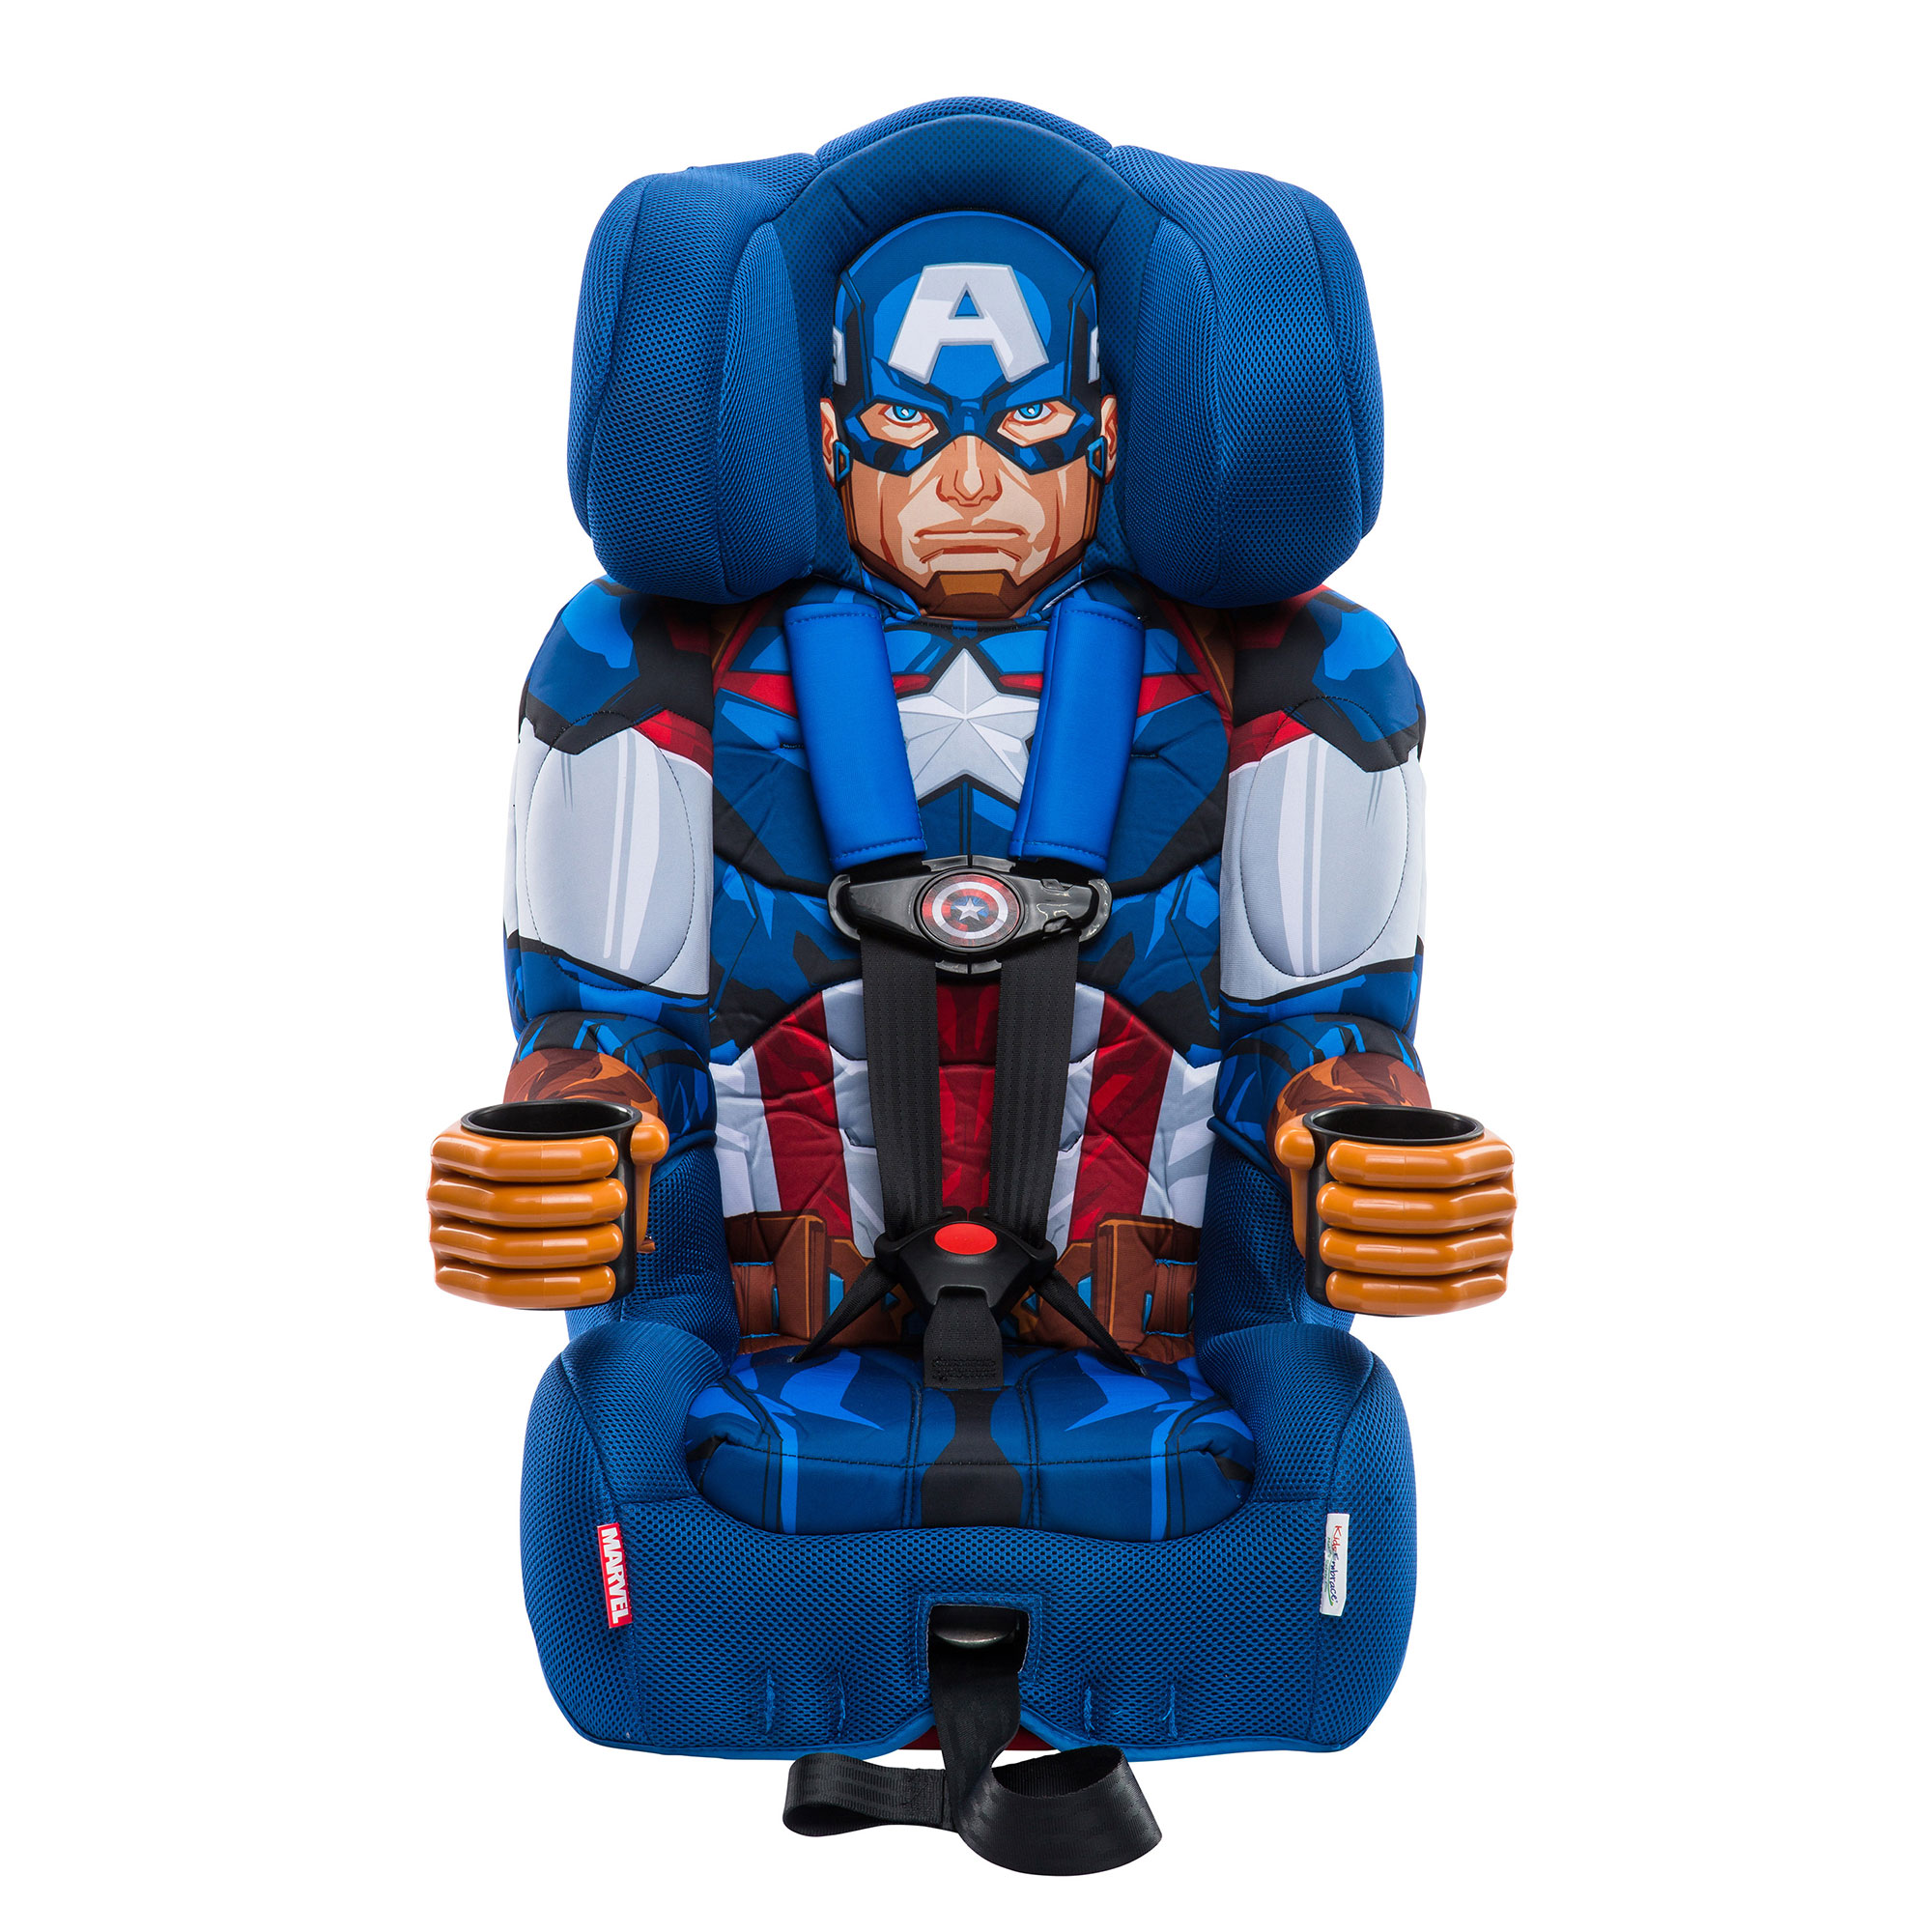 KidsEmbrace Combination Harness Booster Car Seat, Marvel Avengers Captain America - image 1 of 6